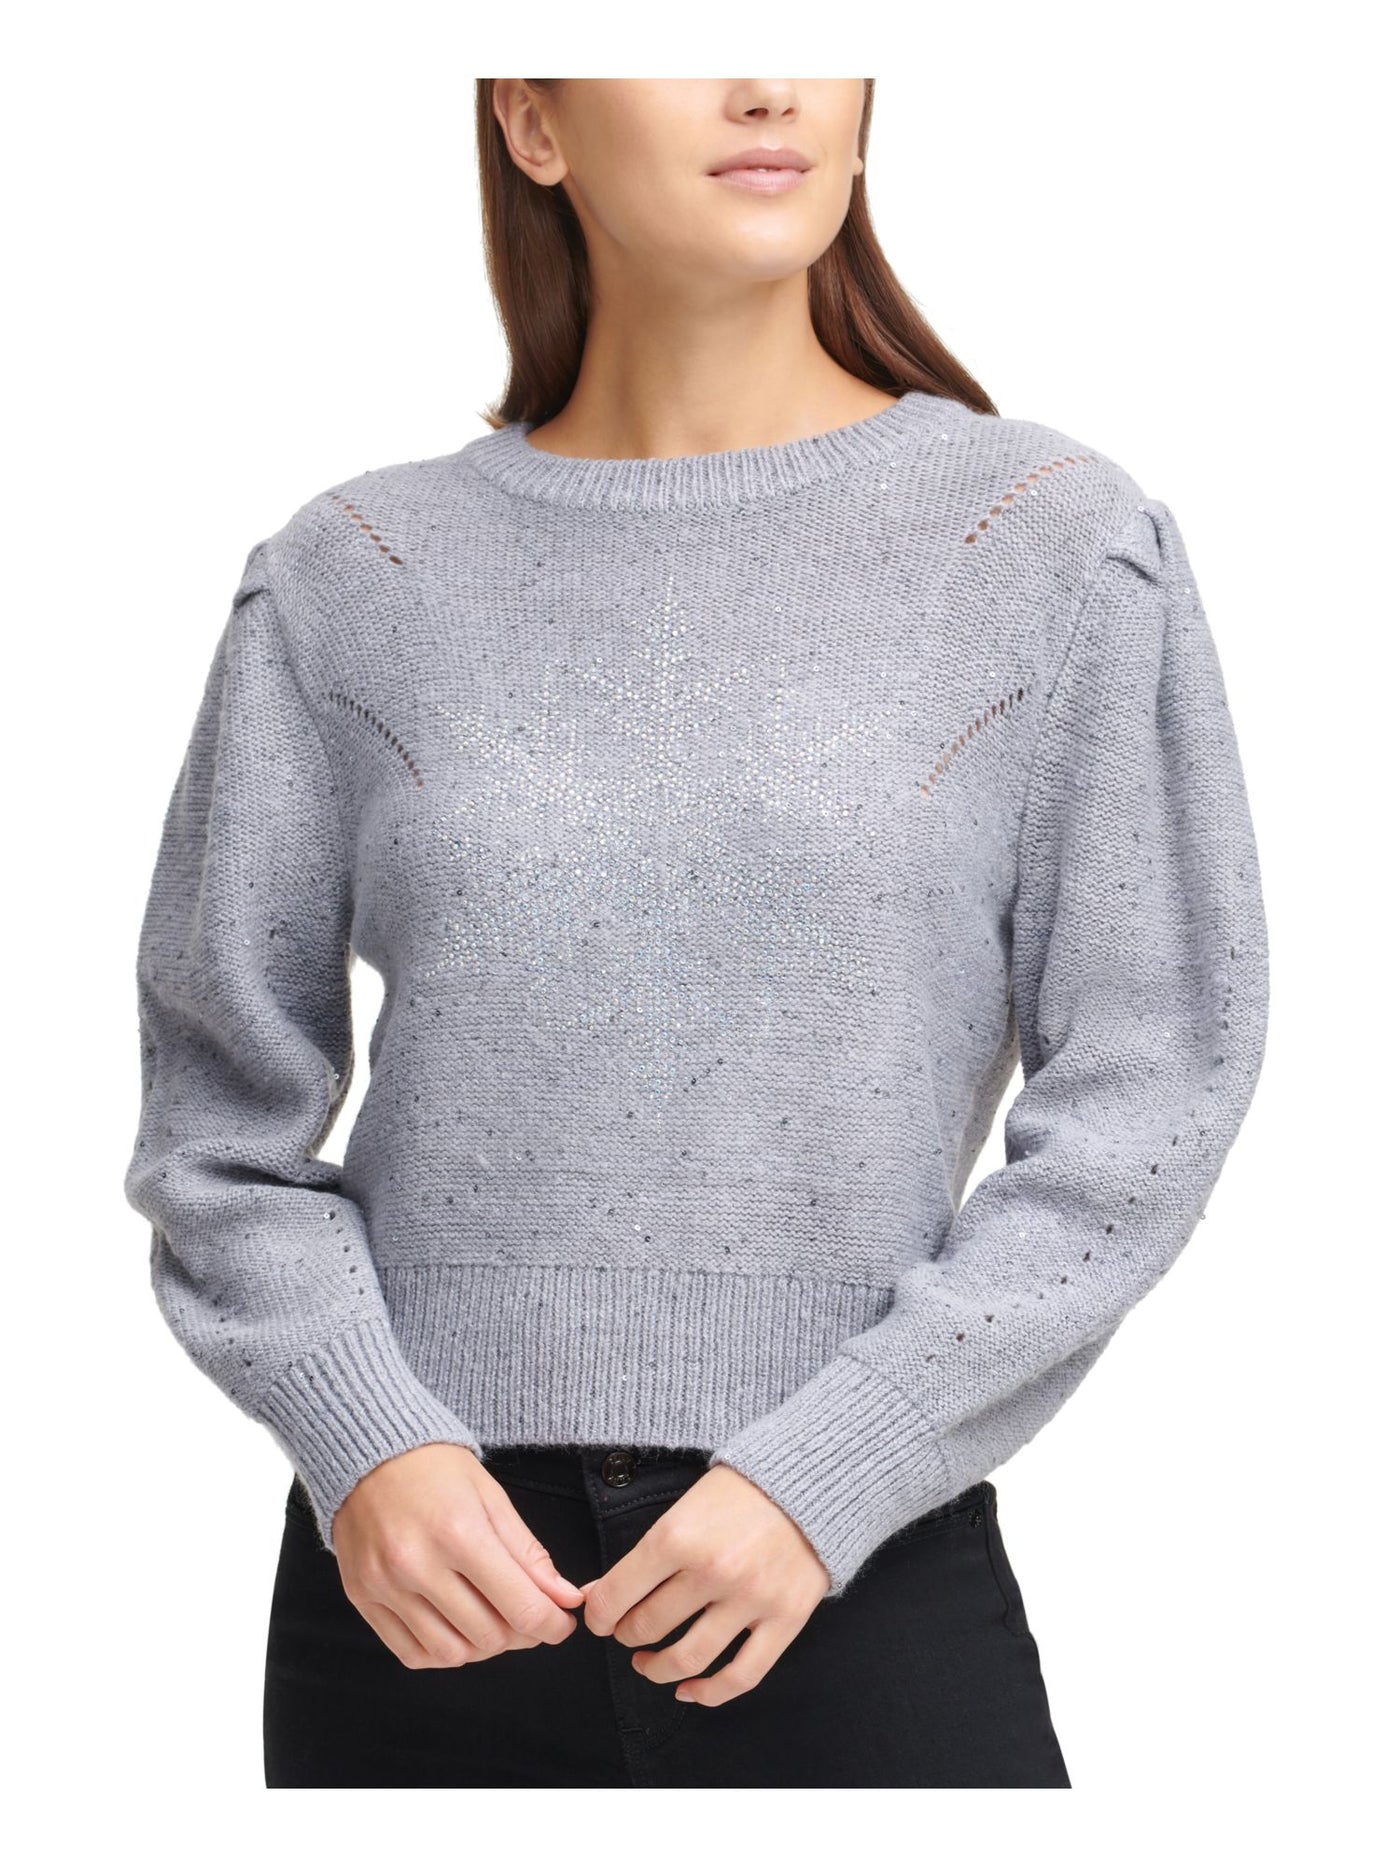 DKNY Womens Sequined Puffed Shoulders Long Sleeve Jewel Neck Sweater